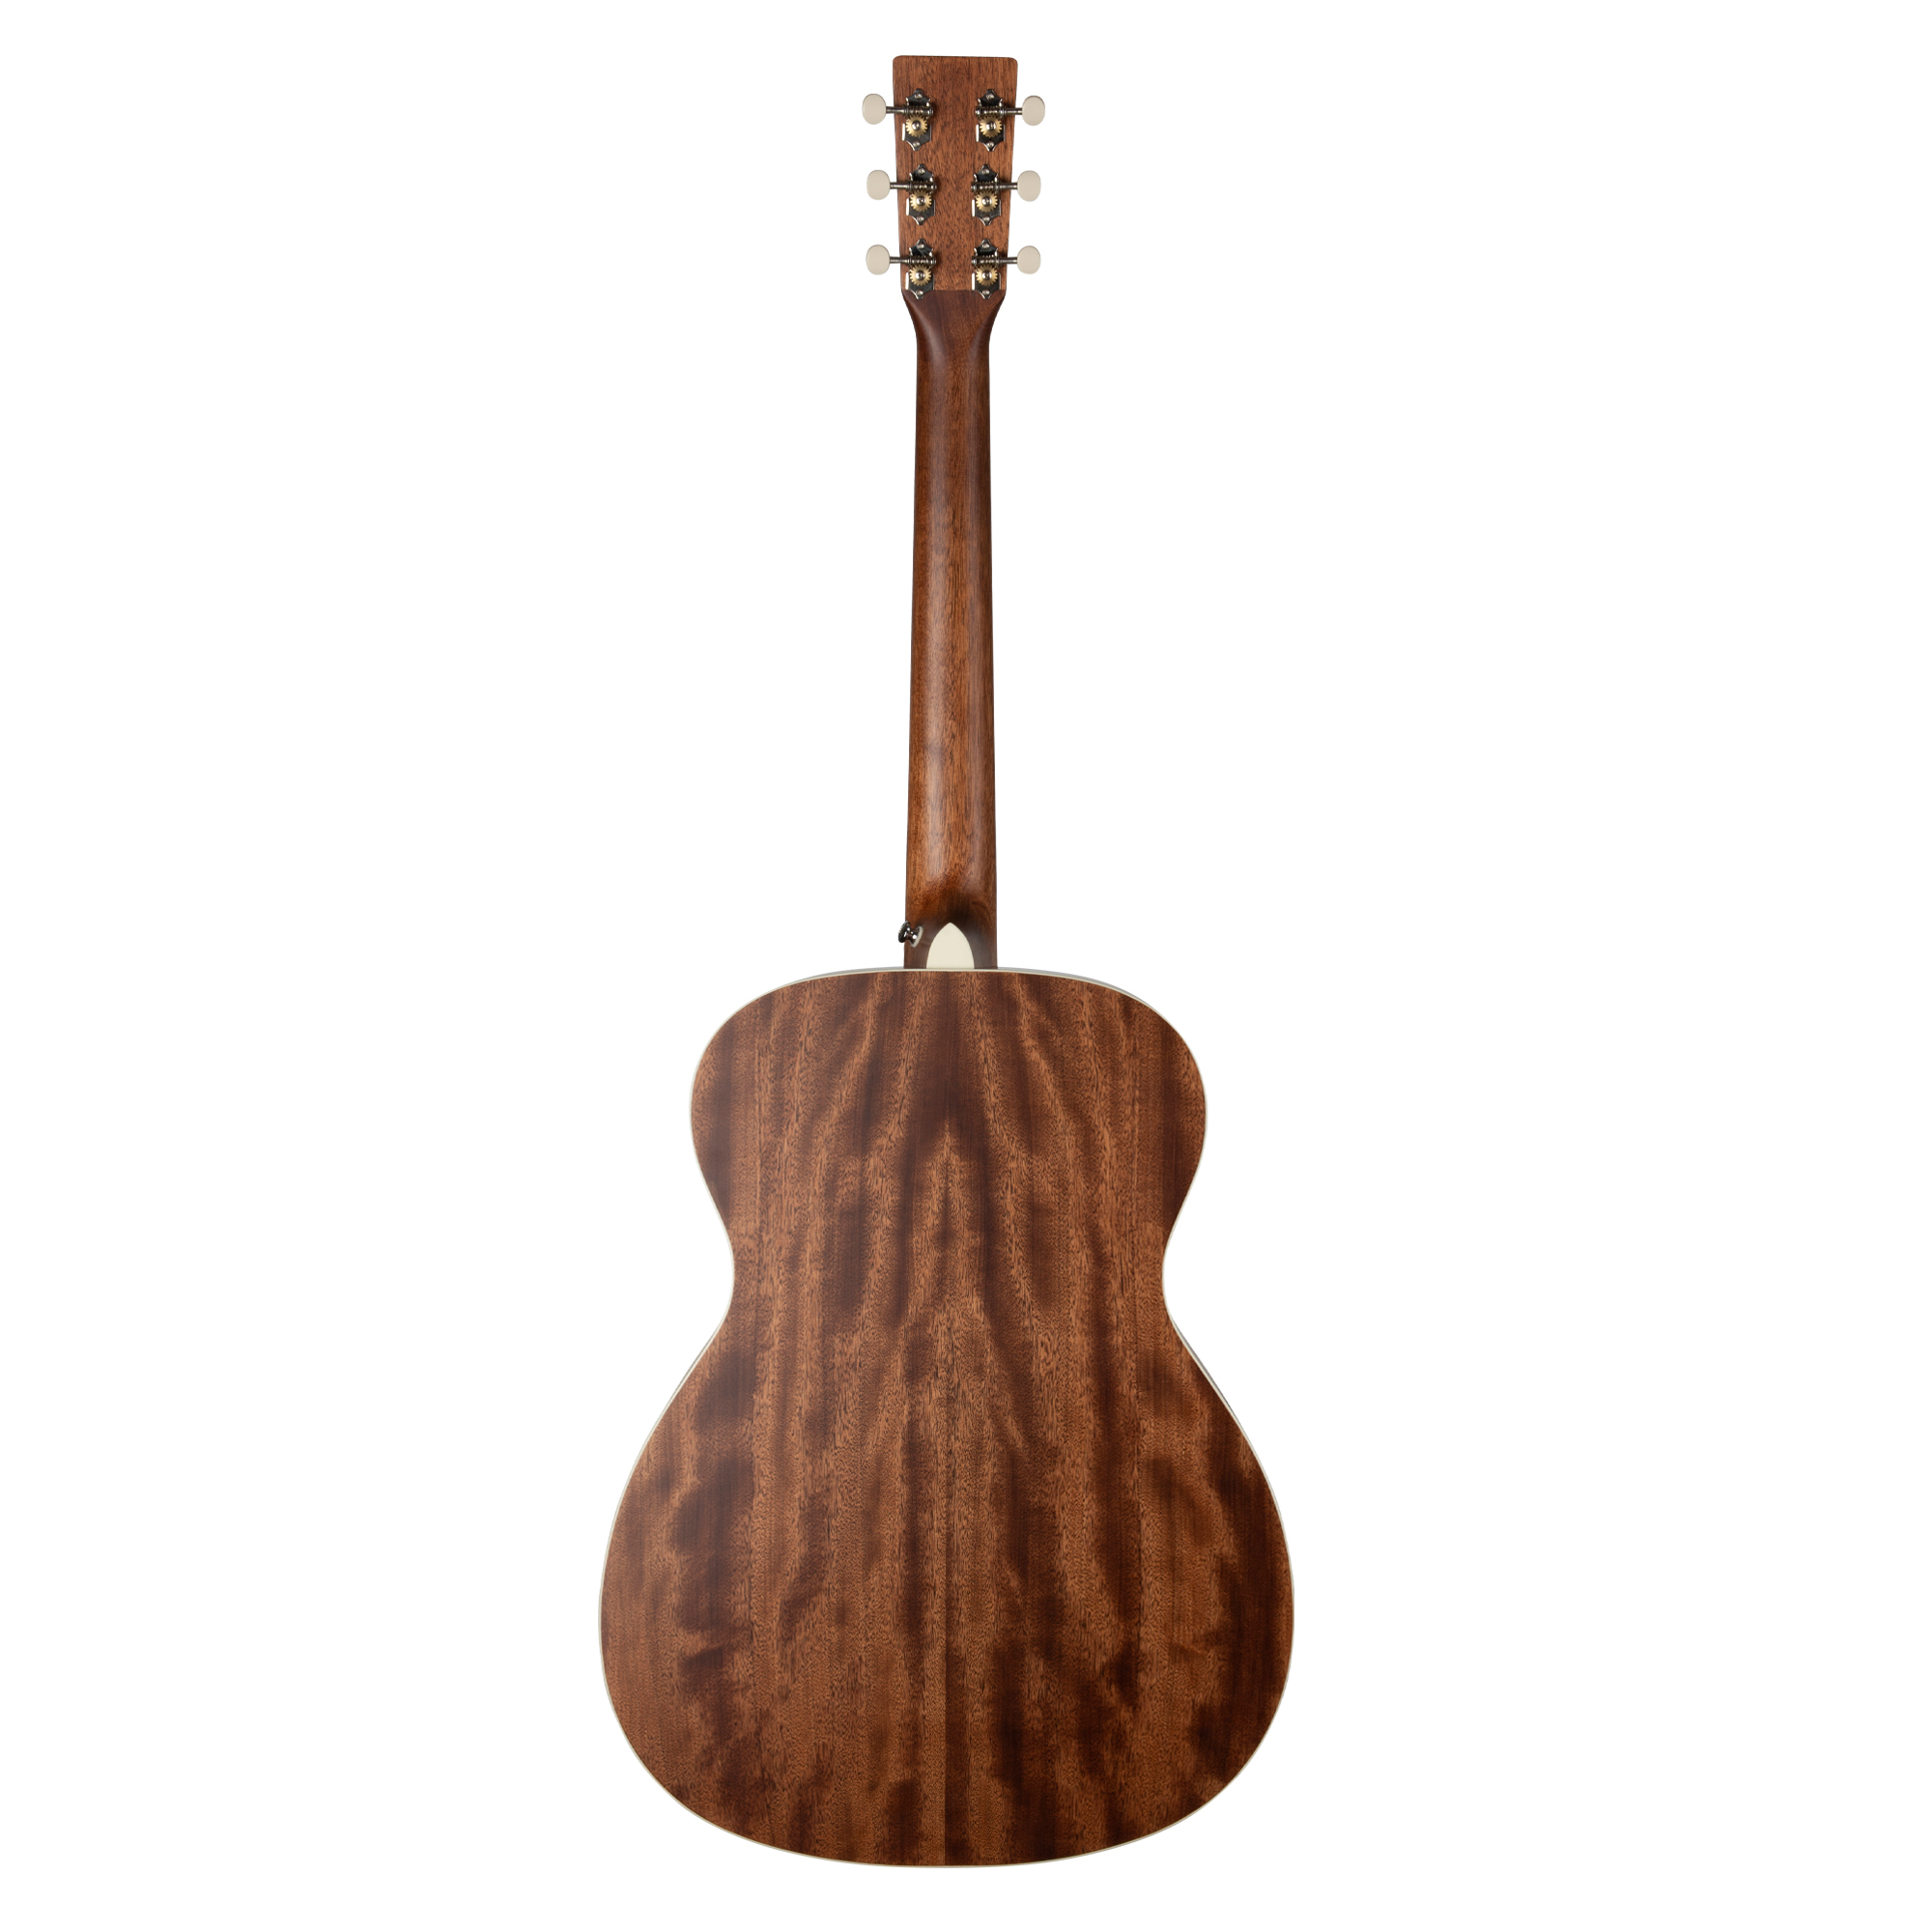 Art & Lutherie Legacy Natural EQ по цене 49 990 ₽